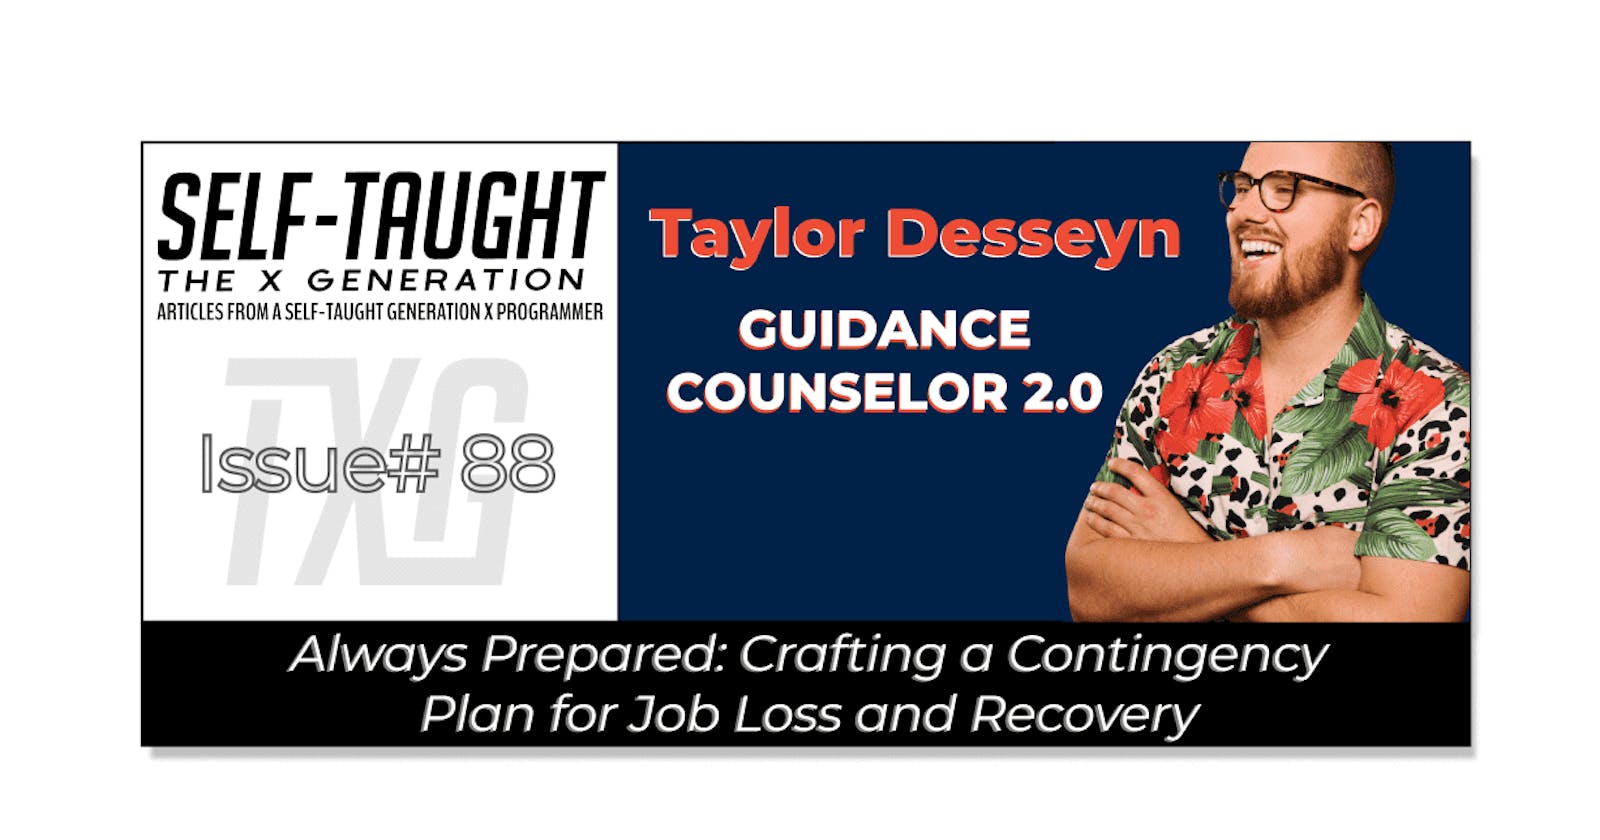 Always Prepared: Crafting a Contingency Plan for Job Loss and Recovery